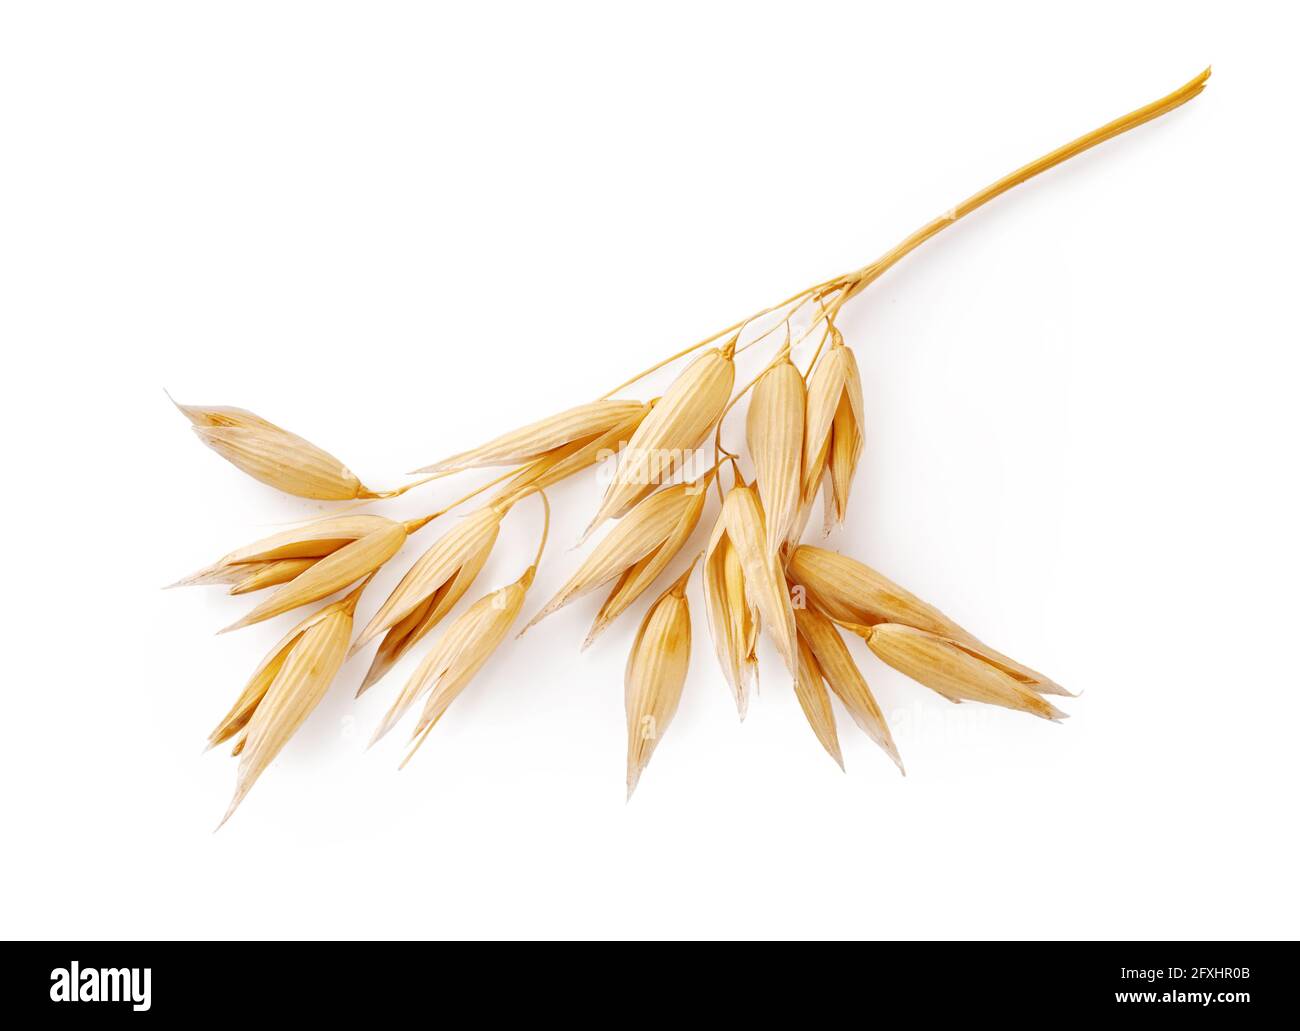 Ears of oats isolated on white background. Top view of oat plant. Stock Photo